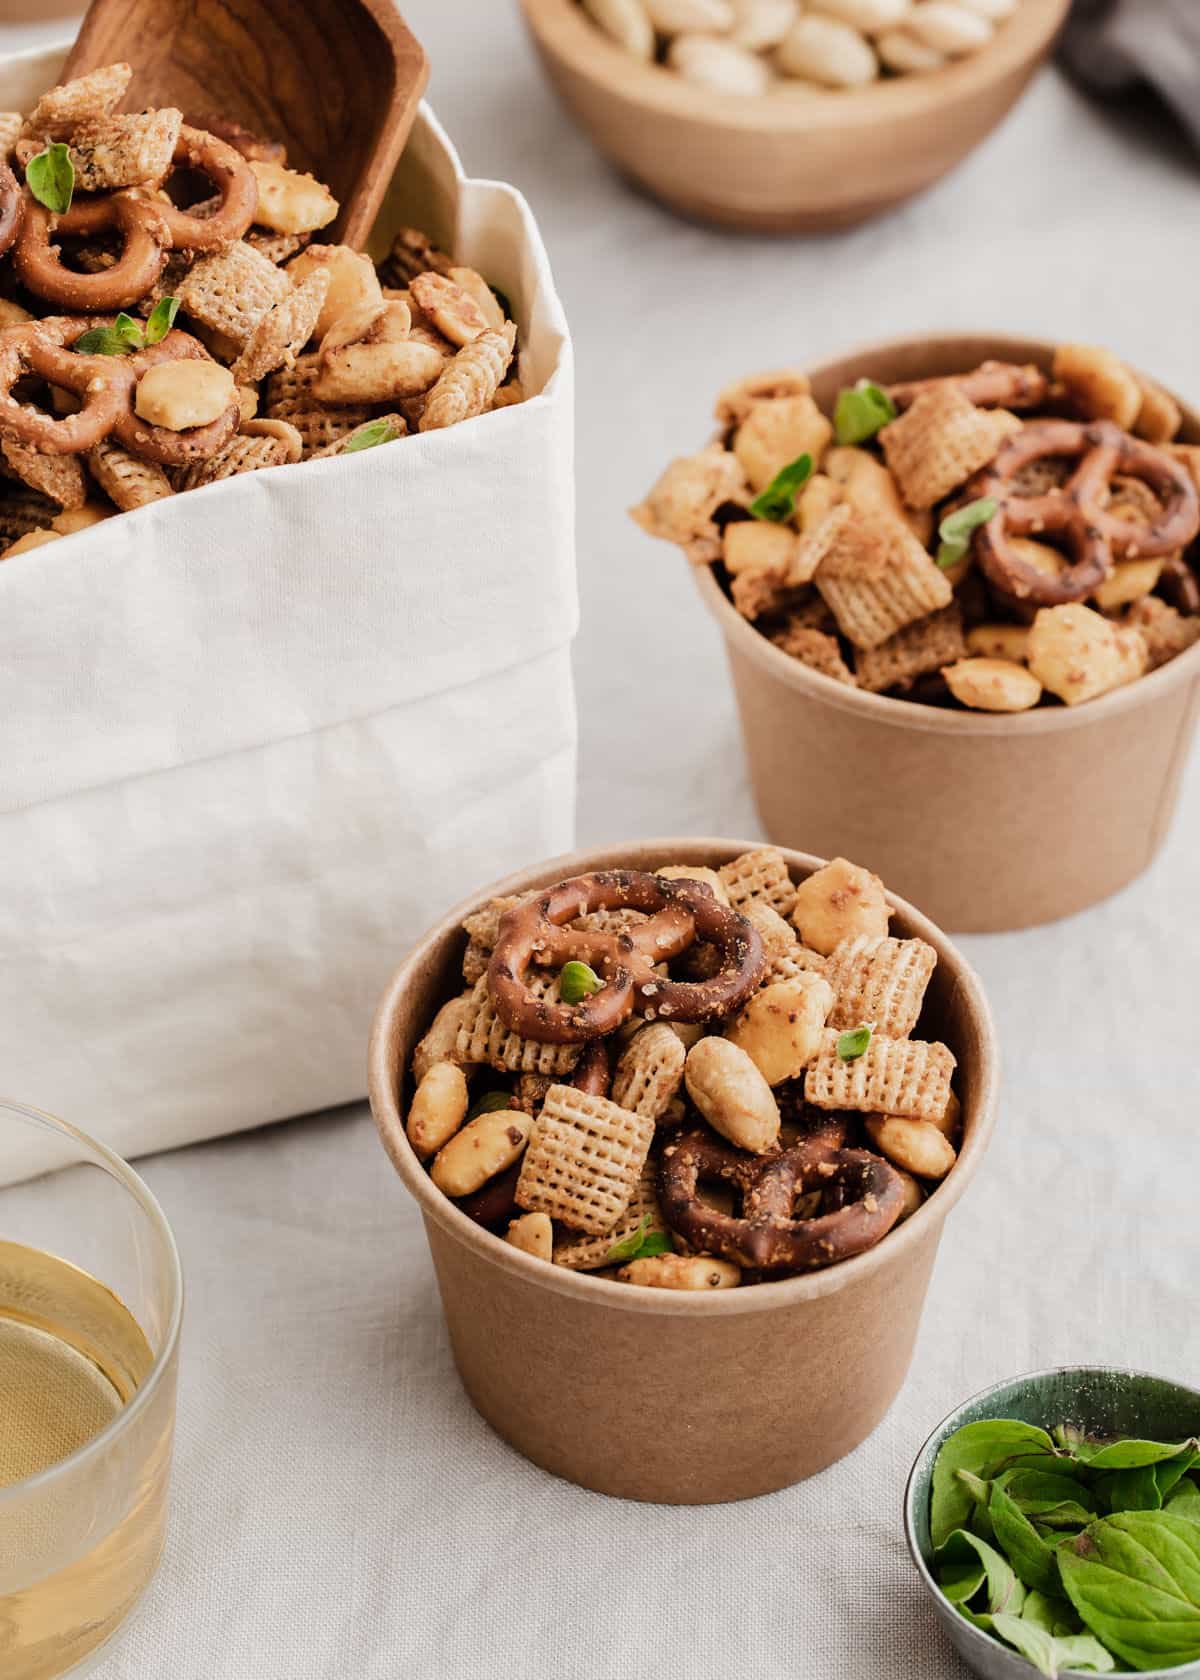 small brown snack cups filled with Chex mix on table with white bag full of more snack mix in background.